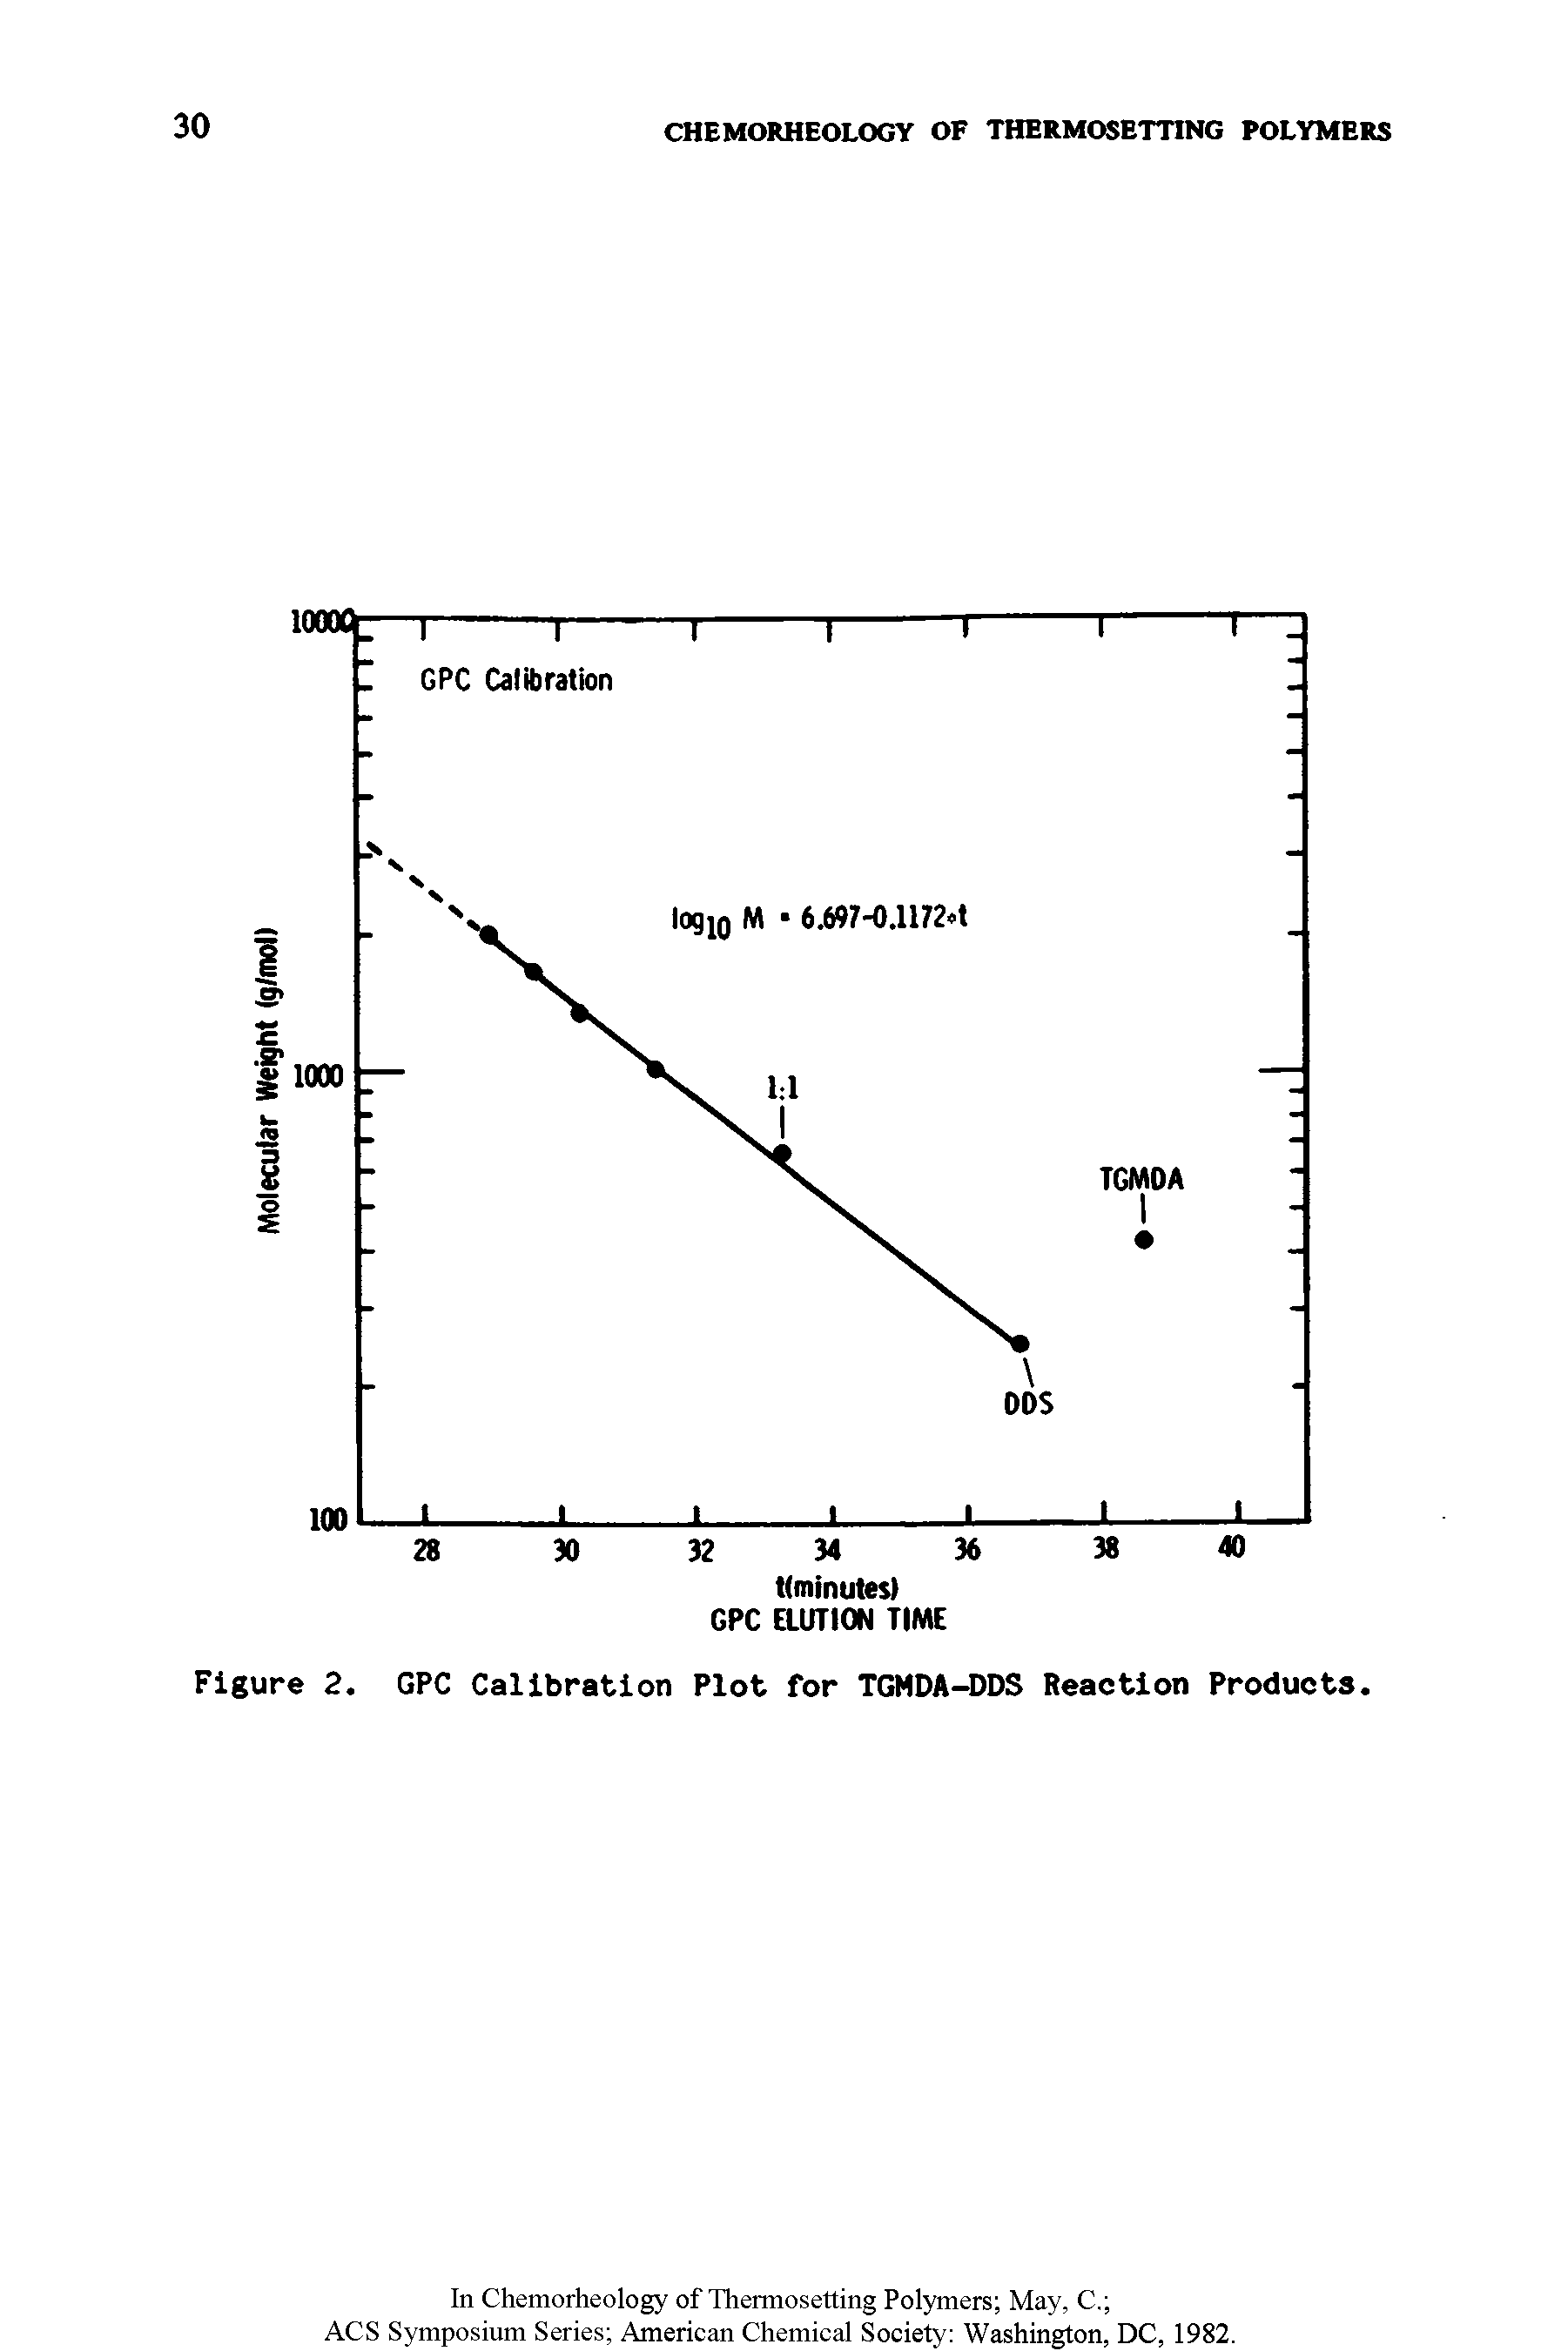 Figure 2. GPC Calibration Plot for TGMDA-DDS Reaction Products.